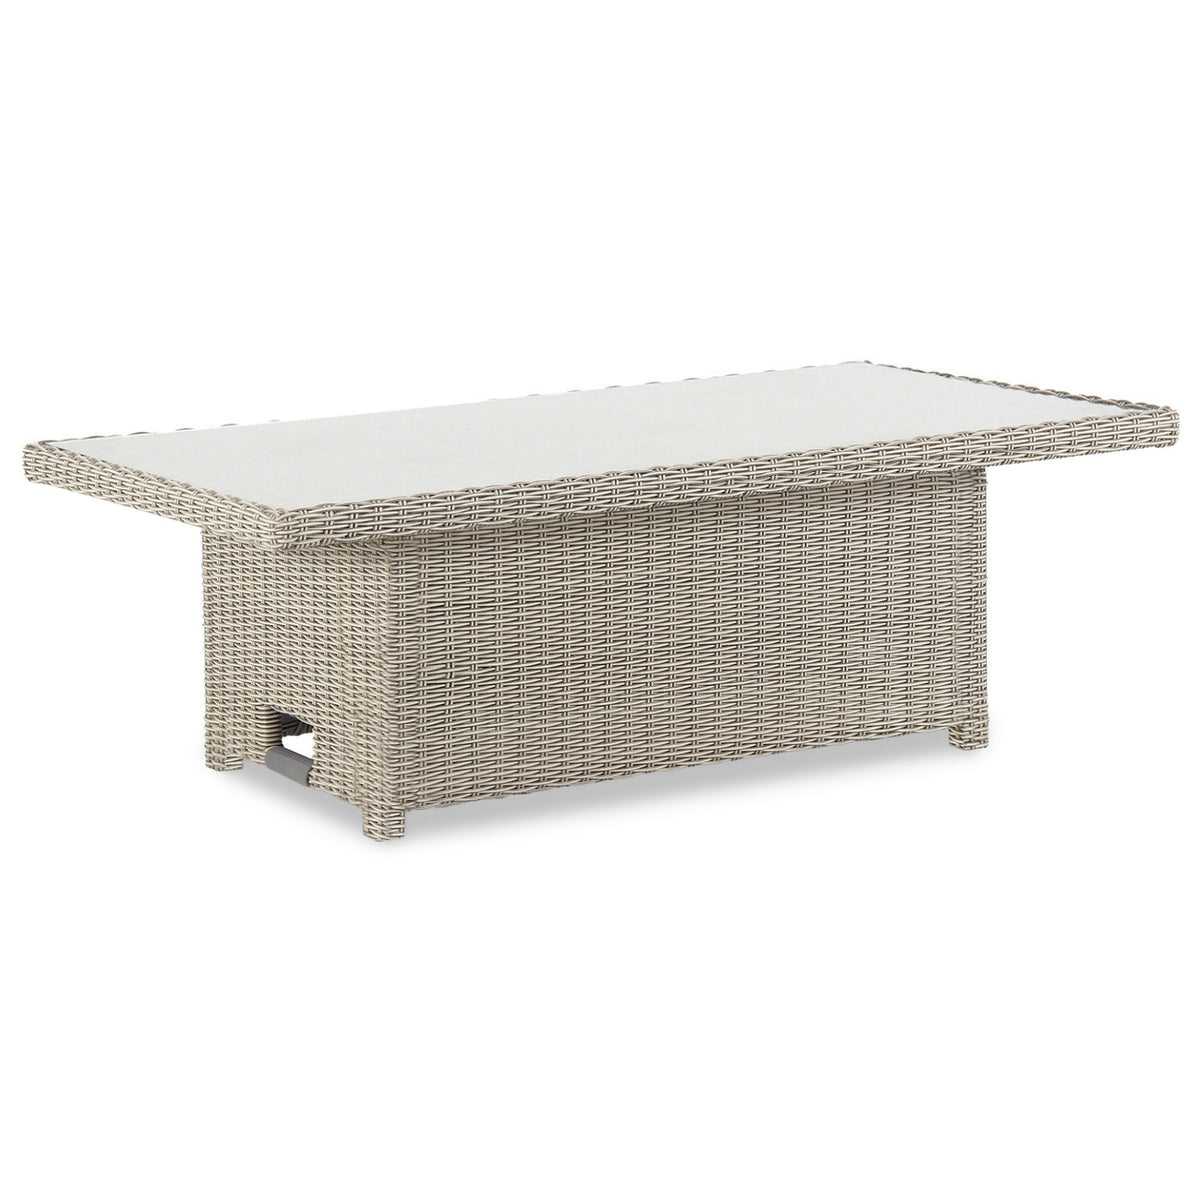 Kettler Palma Signature White Wash Wicker High Low Adjustable Glass Top Table